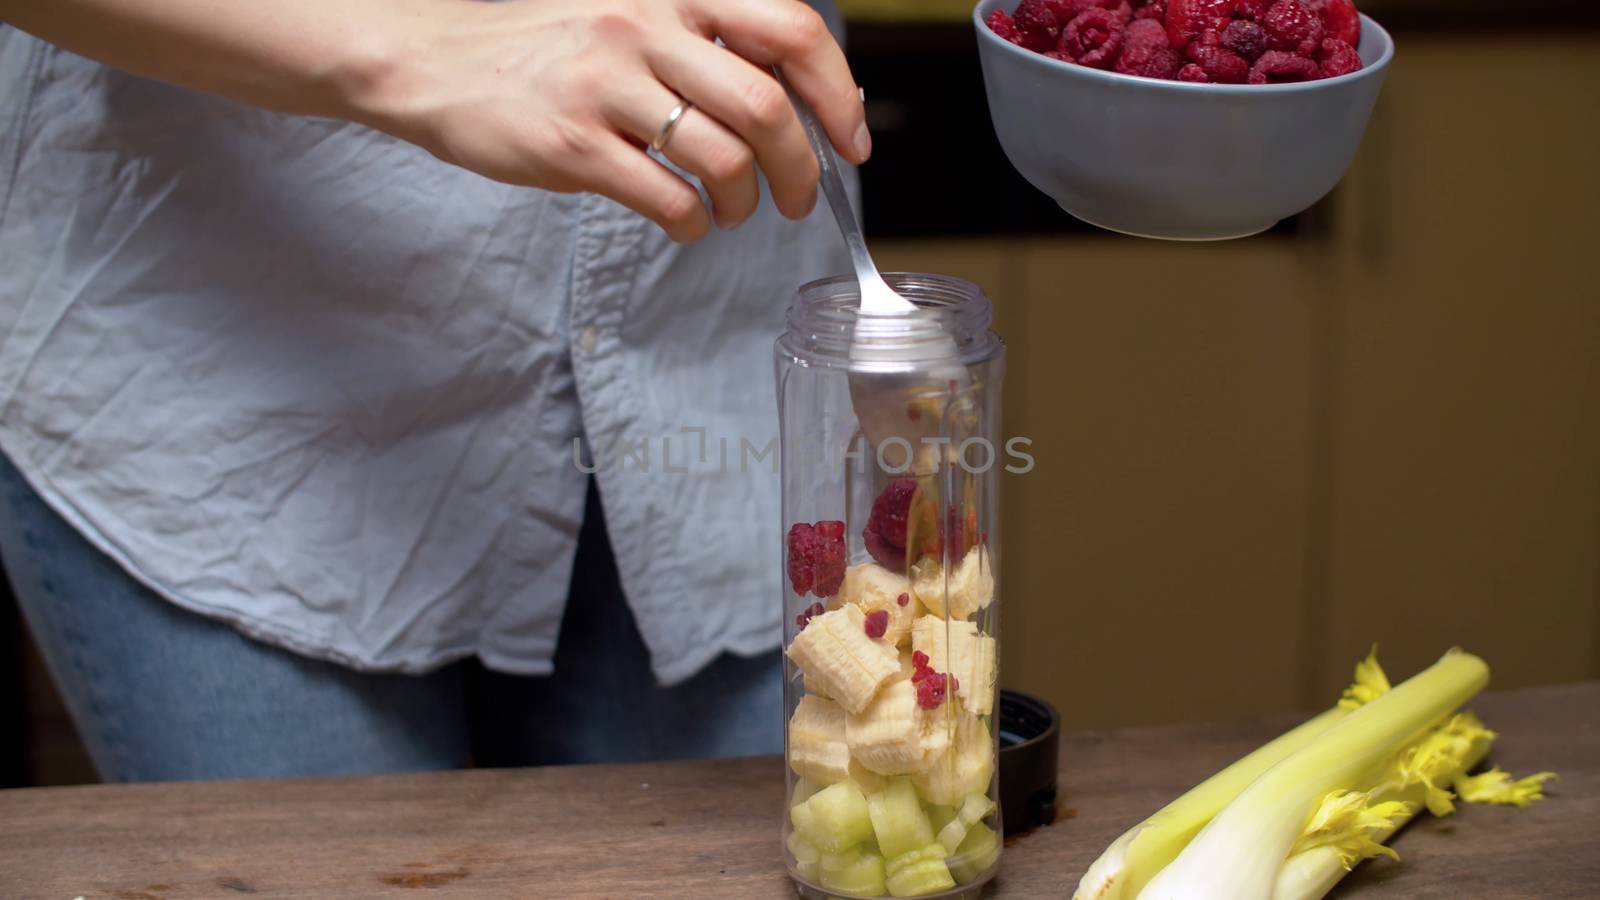 Female hands pouring raspberries in blender glass with banana and celery slices. Healthy lifestyle and eating concept